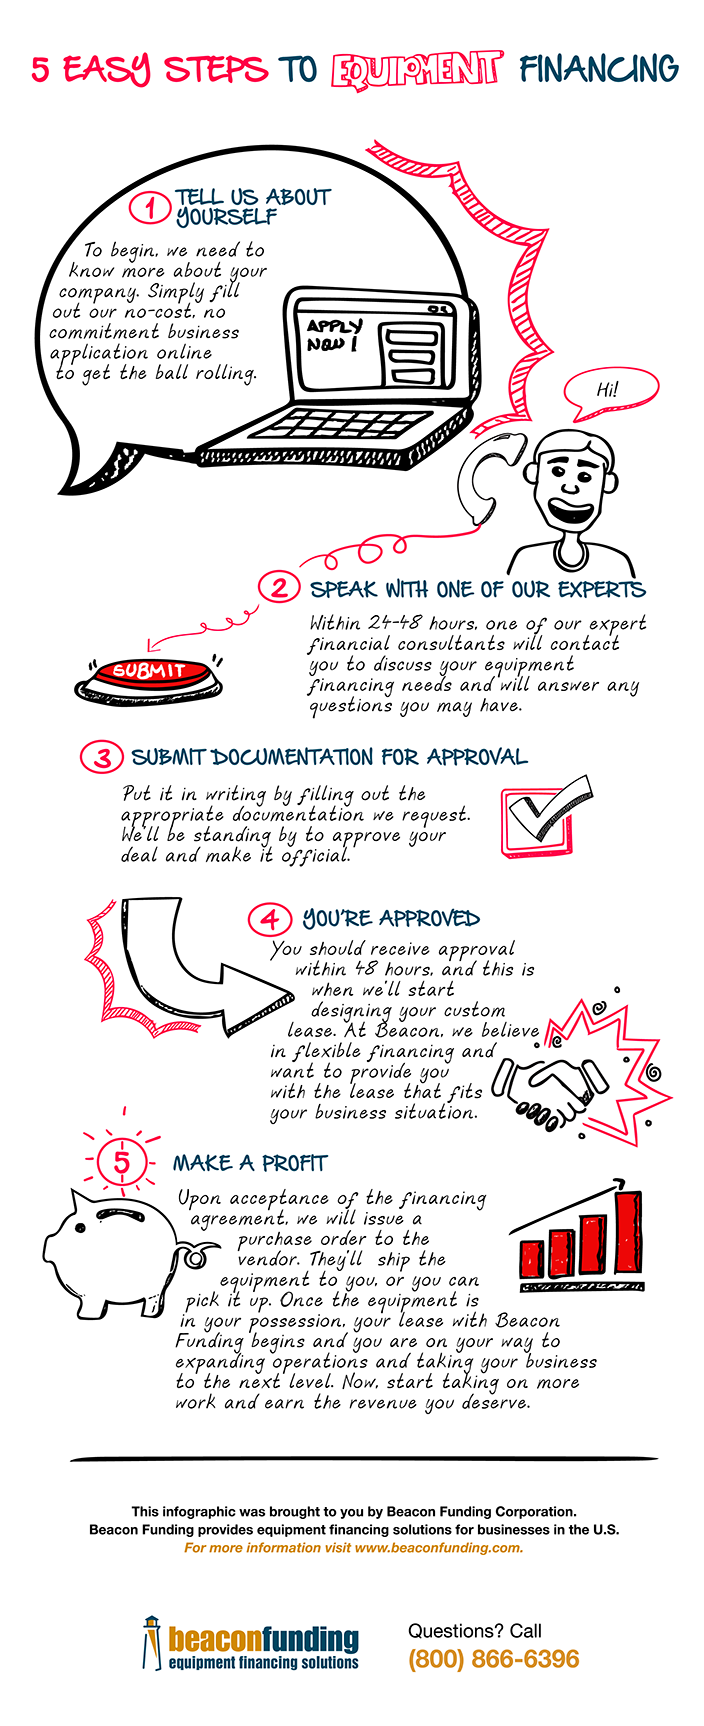 5 easy steps to equipment financing infographic